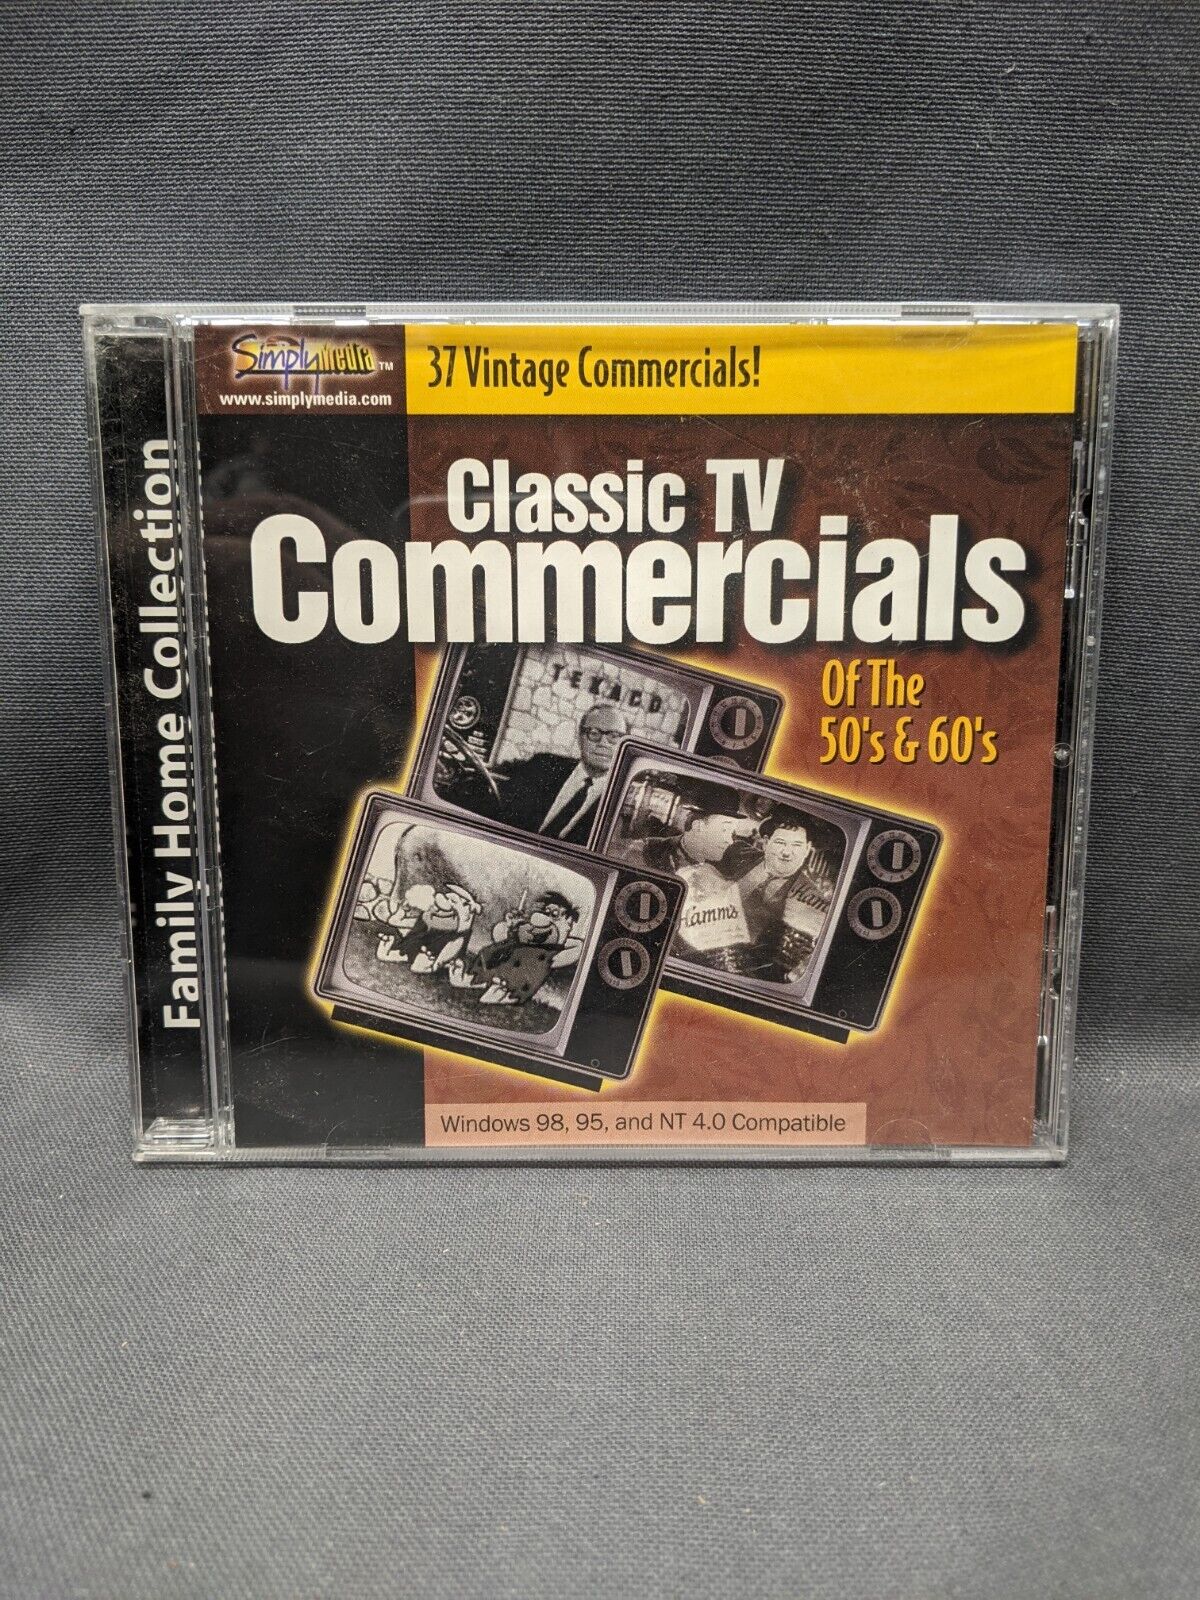 1999, classic tv commercials of the 50s & 60s, 37 vintage commercials, CD